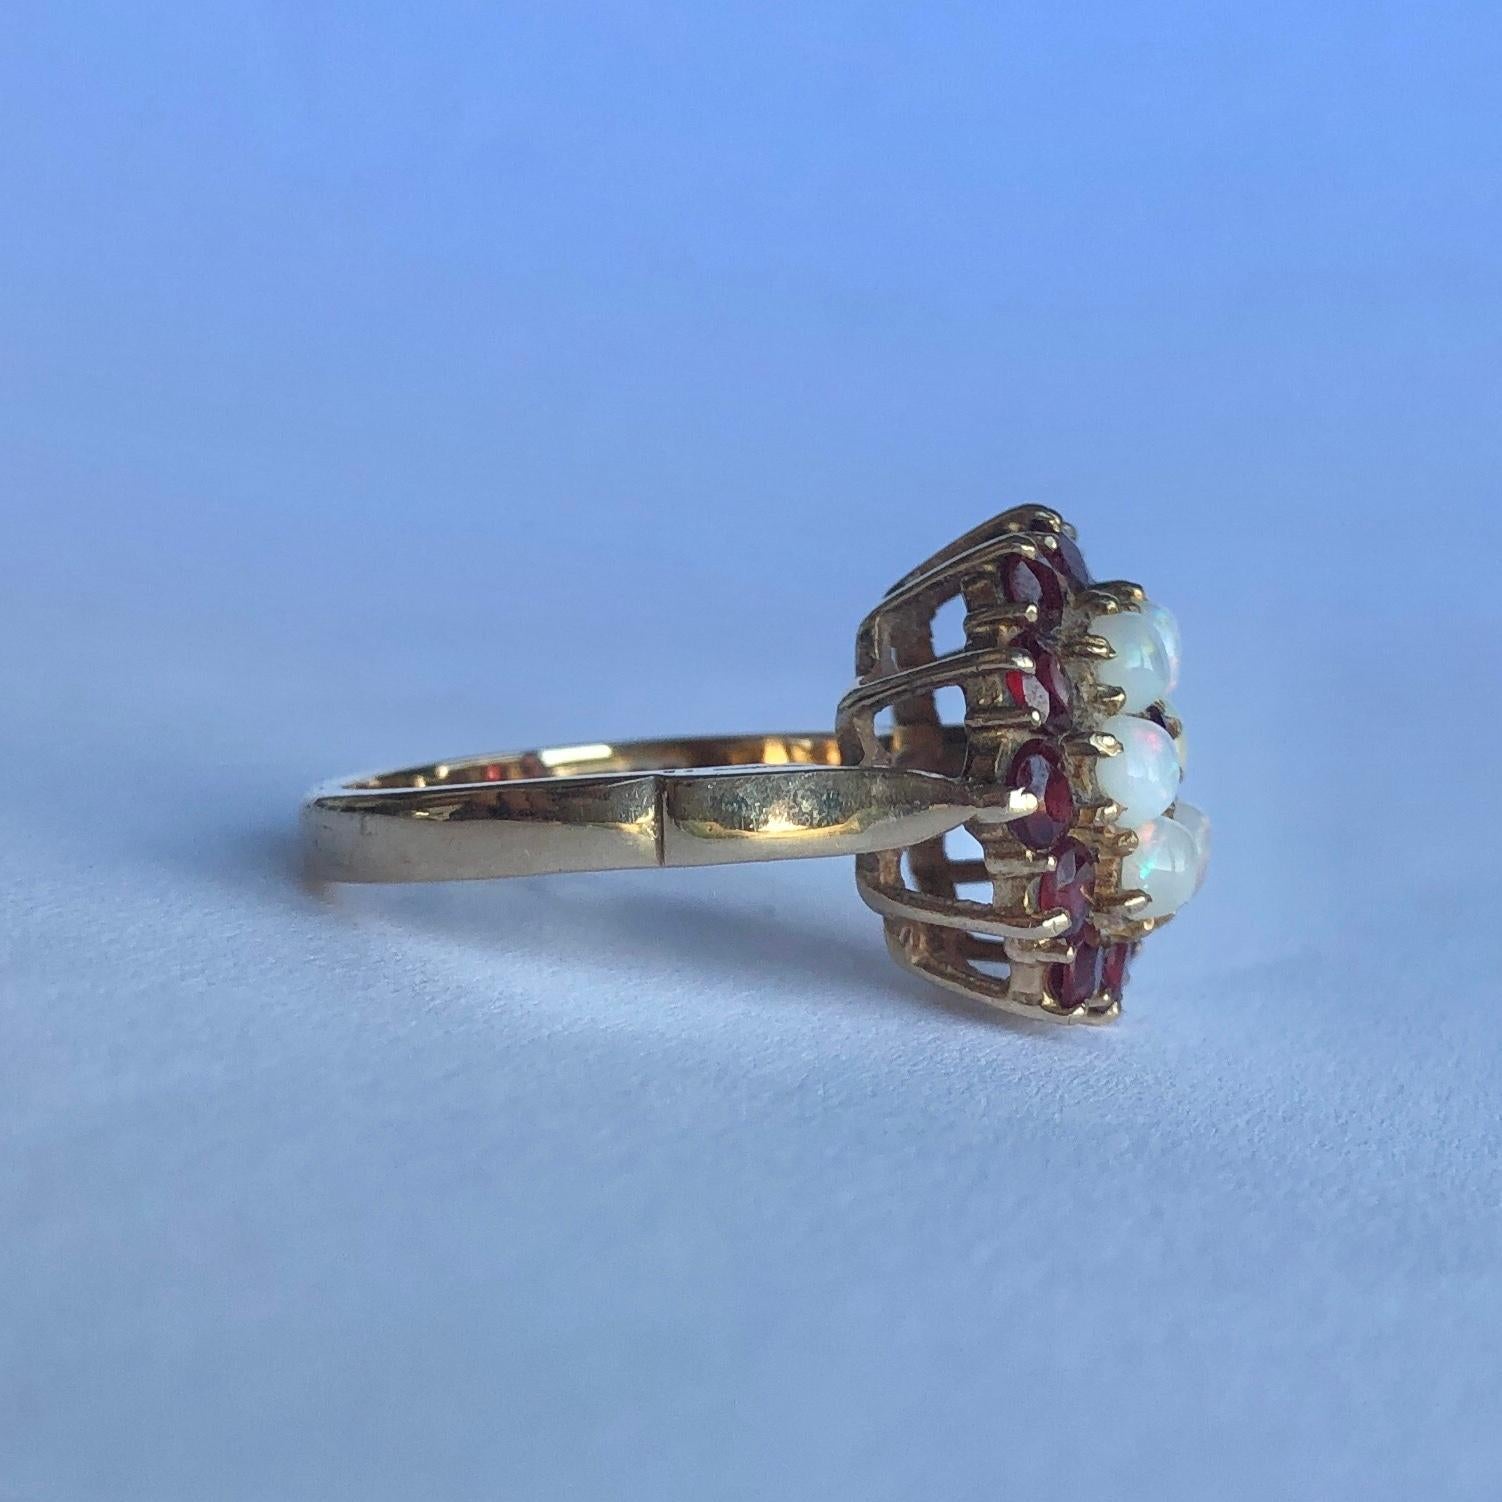 This striking ring holds round cut garnets totalling approx 1.3carat and 6 shimmering opals. All the stones sit in 9carat gold claws. Made in London, England. 

Ring Size: M 1/2 or 6 1/2 
Cluster Diameter: 15mm
Height Off Finger: 9mm

Weight: 4.8g